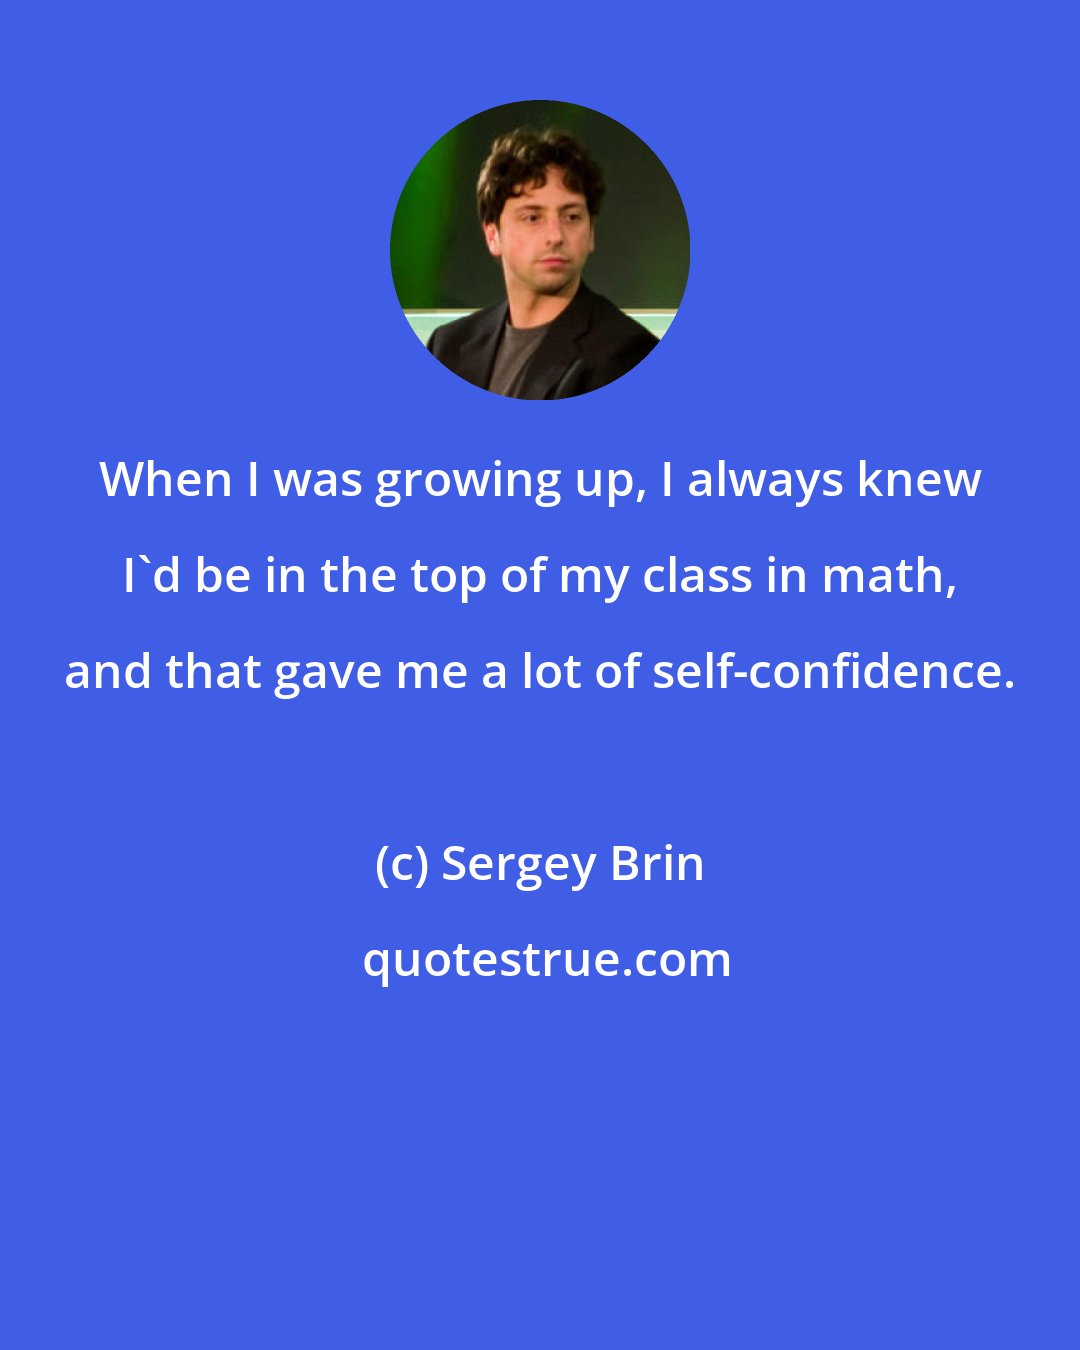 Sergey Brin: When I was growing up, I always knew I'd be in the top of my class in math, and that gave me a lot of self-confidence.